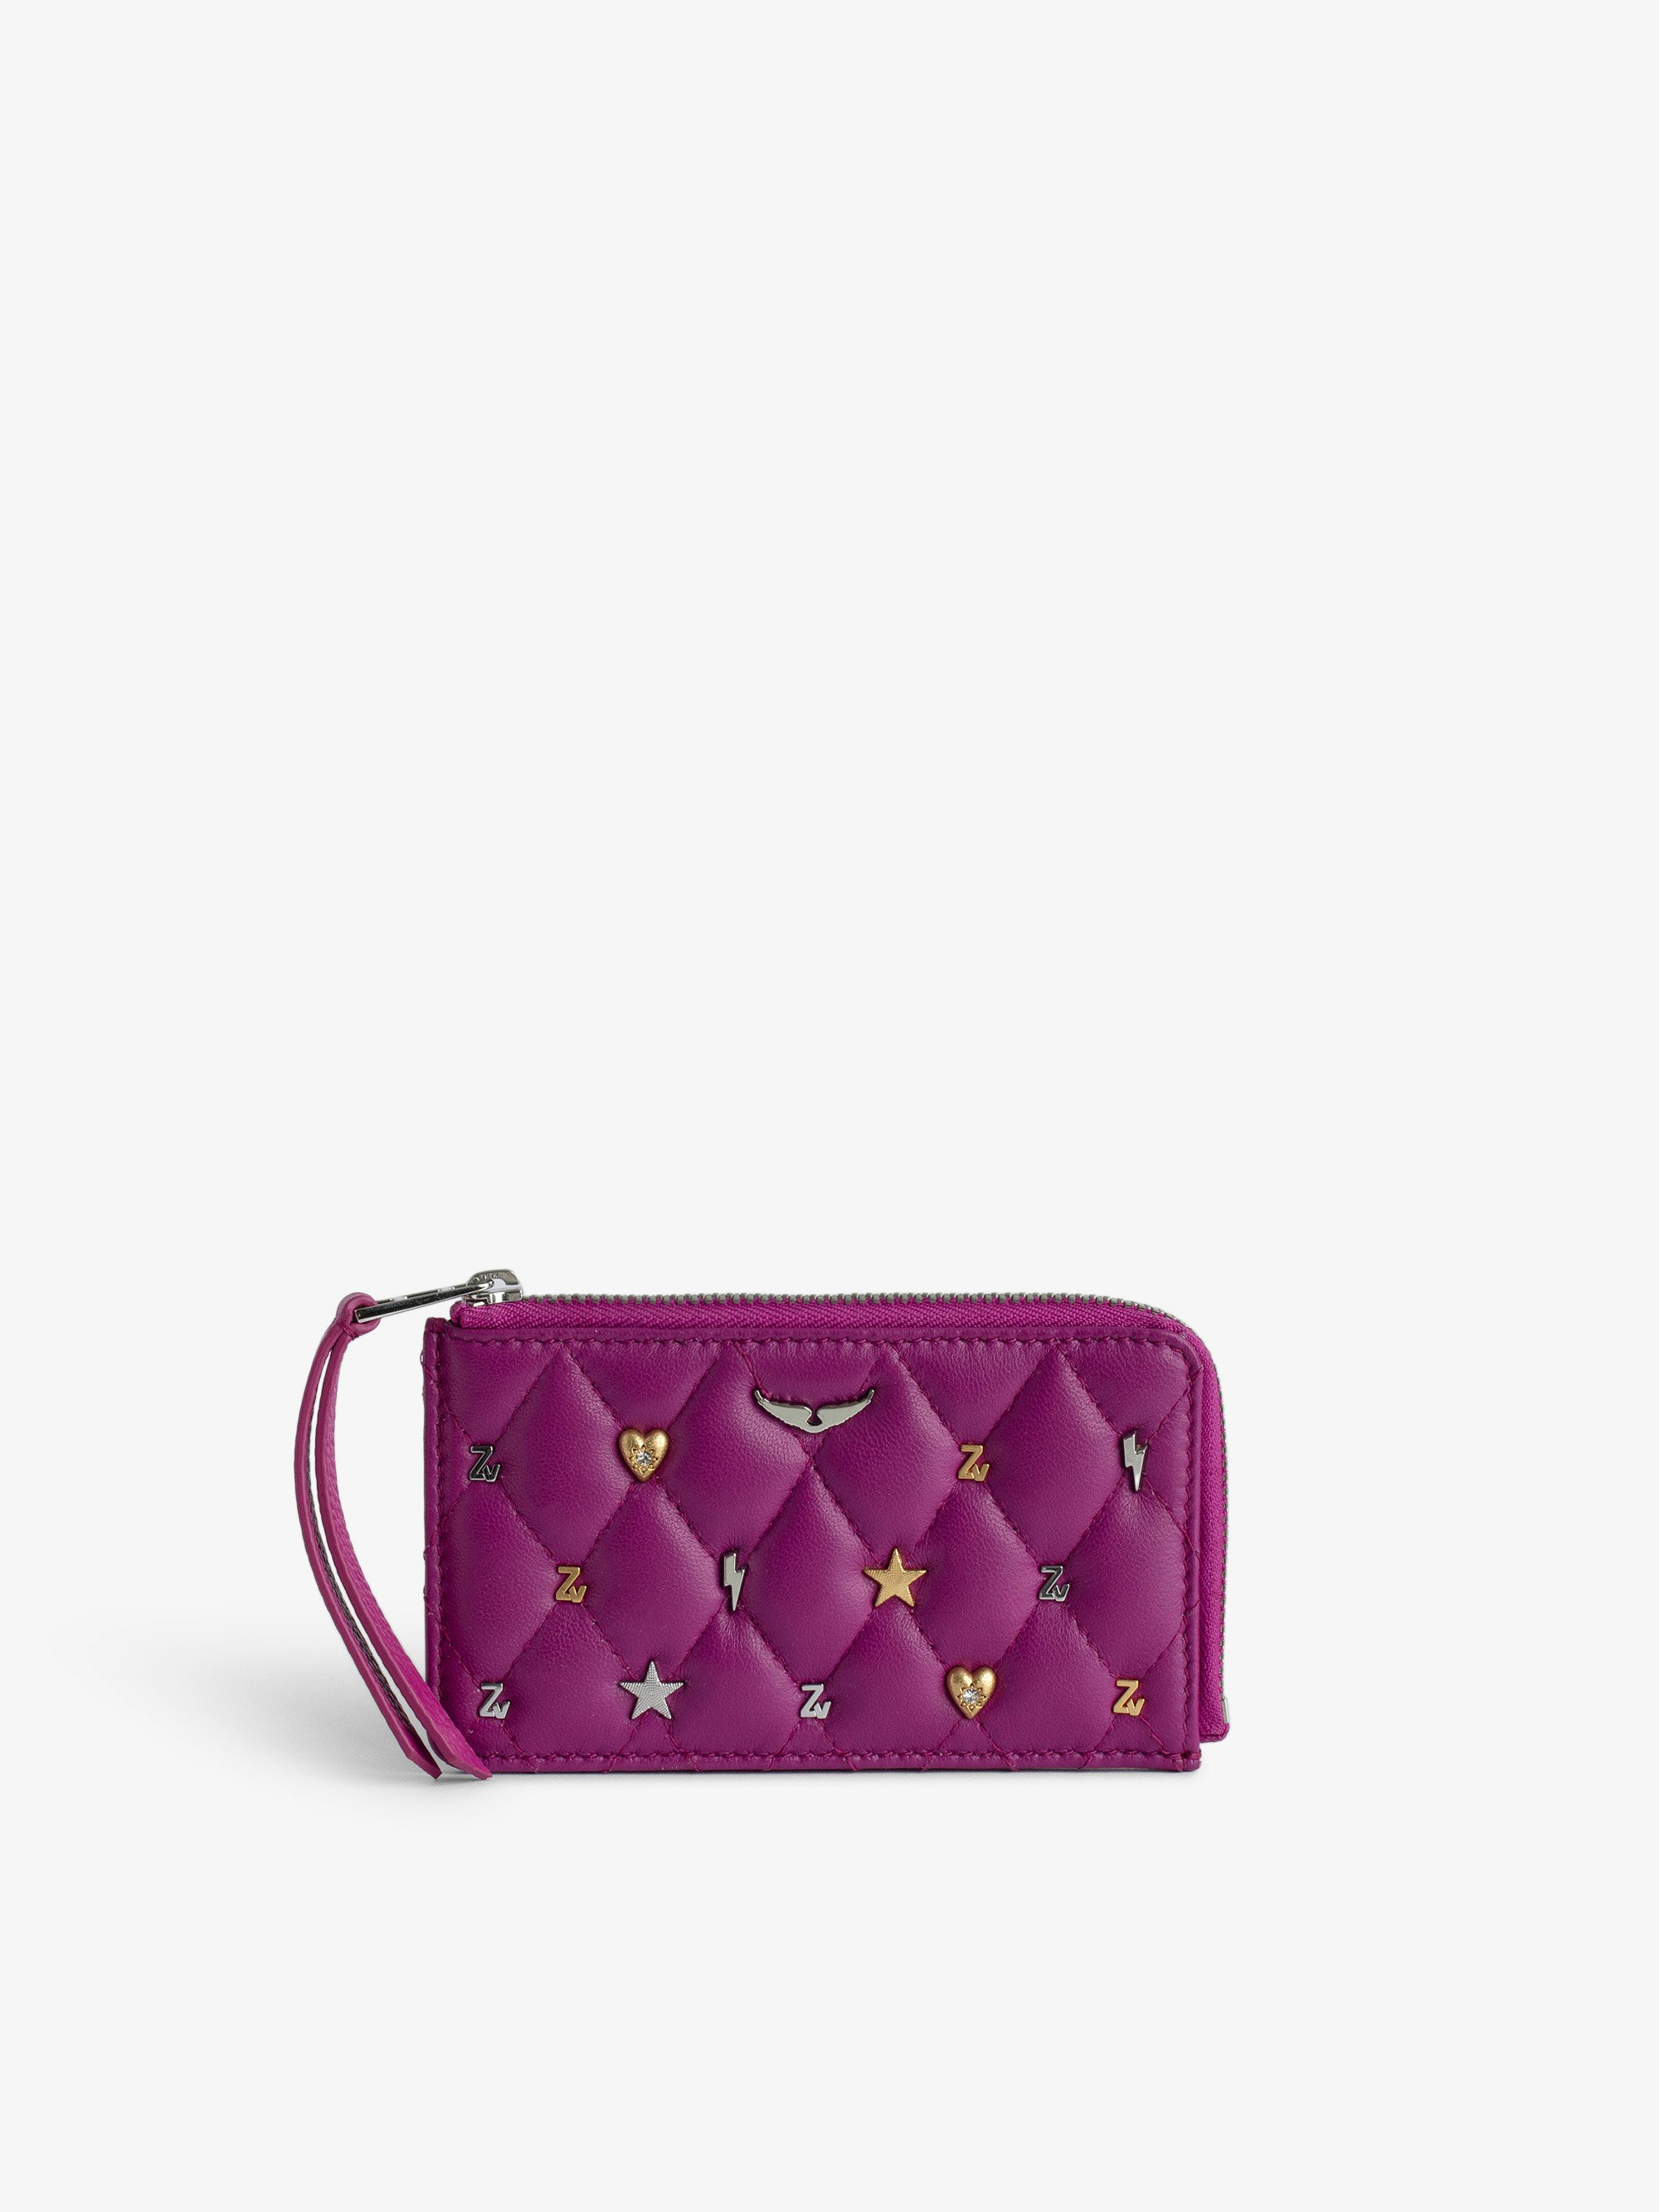 ZV Card Card Holder - Fuchsia smooth and quilted leather card holder with wings charm and lucky charms.